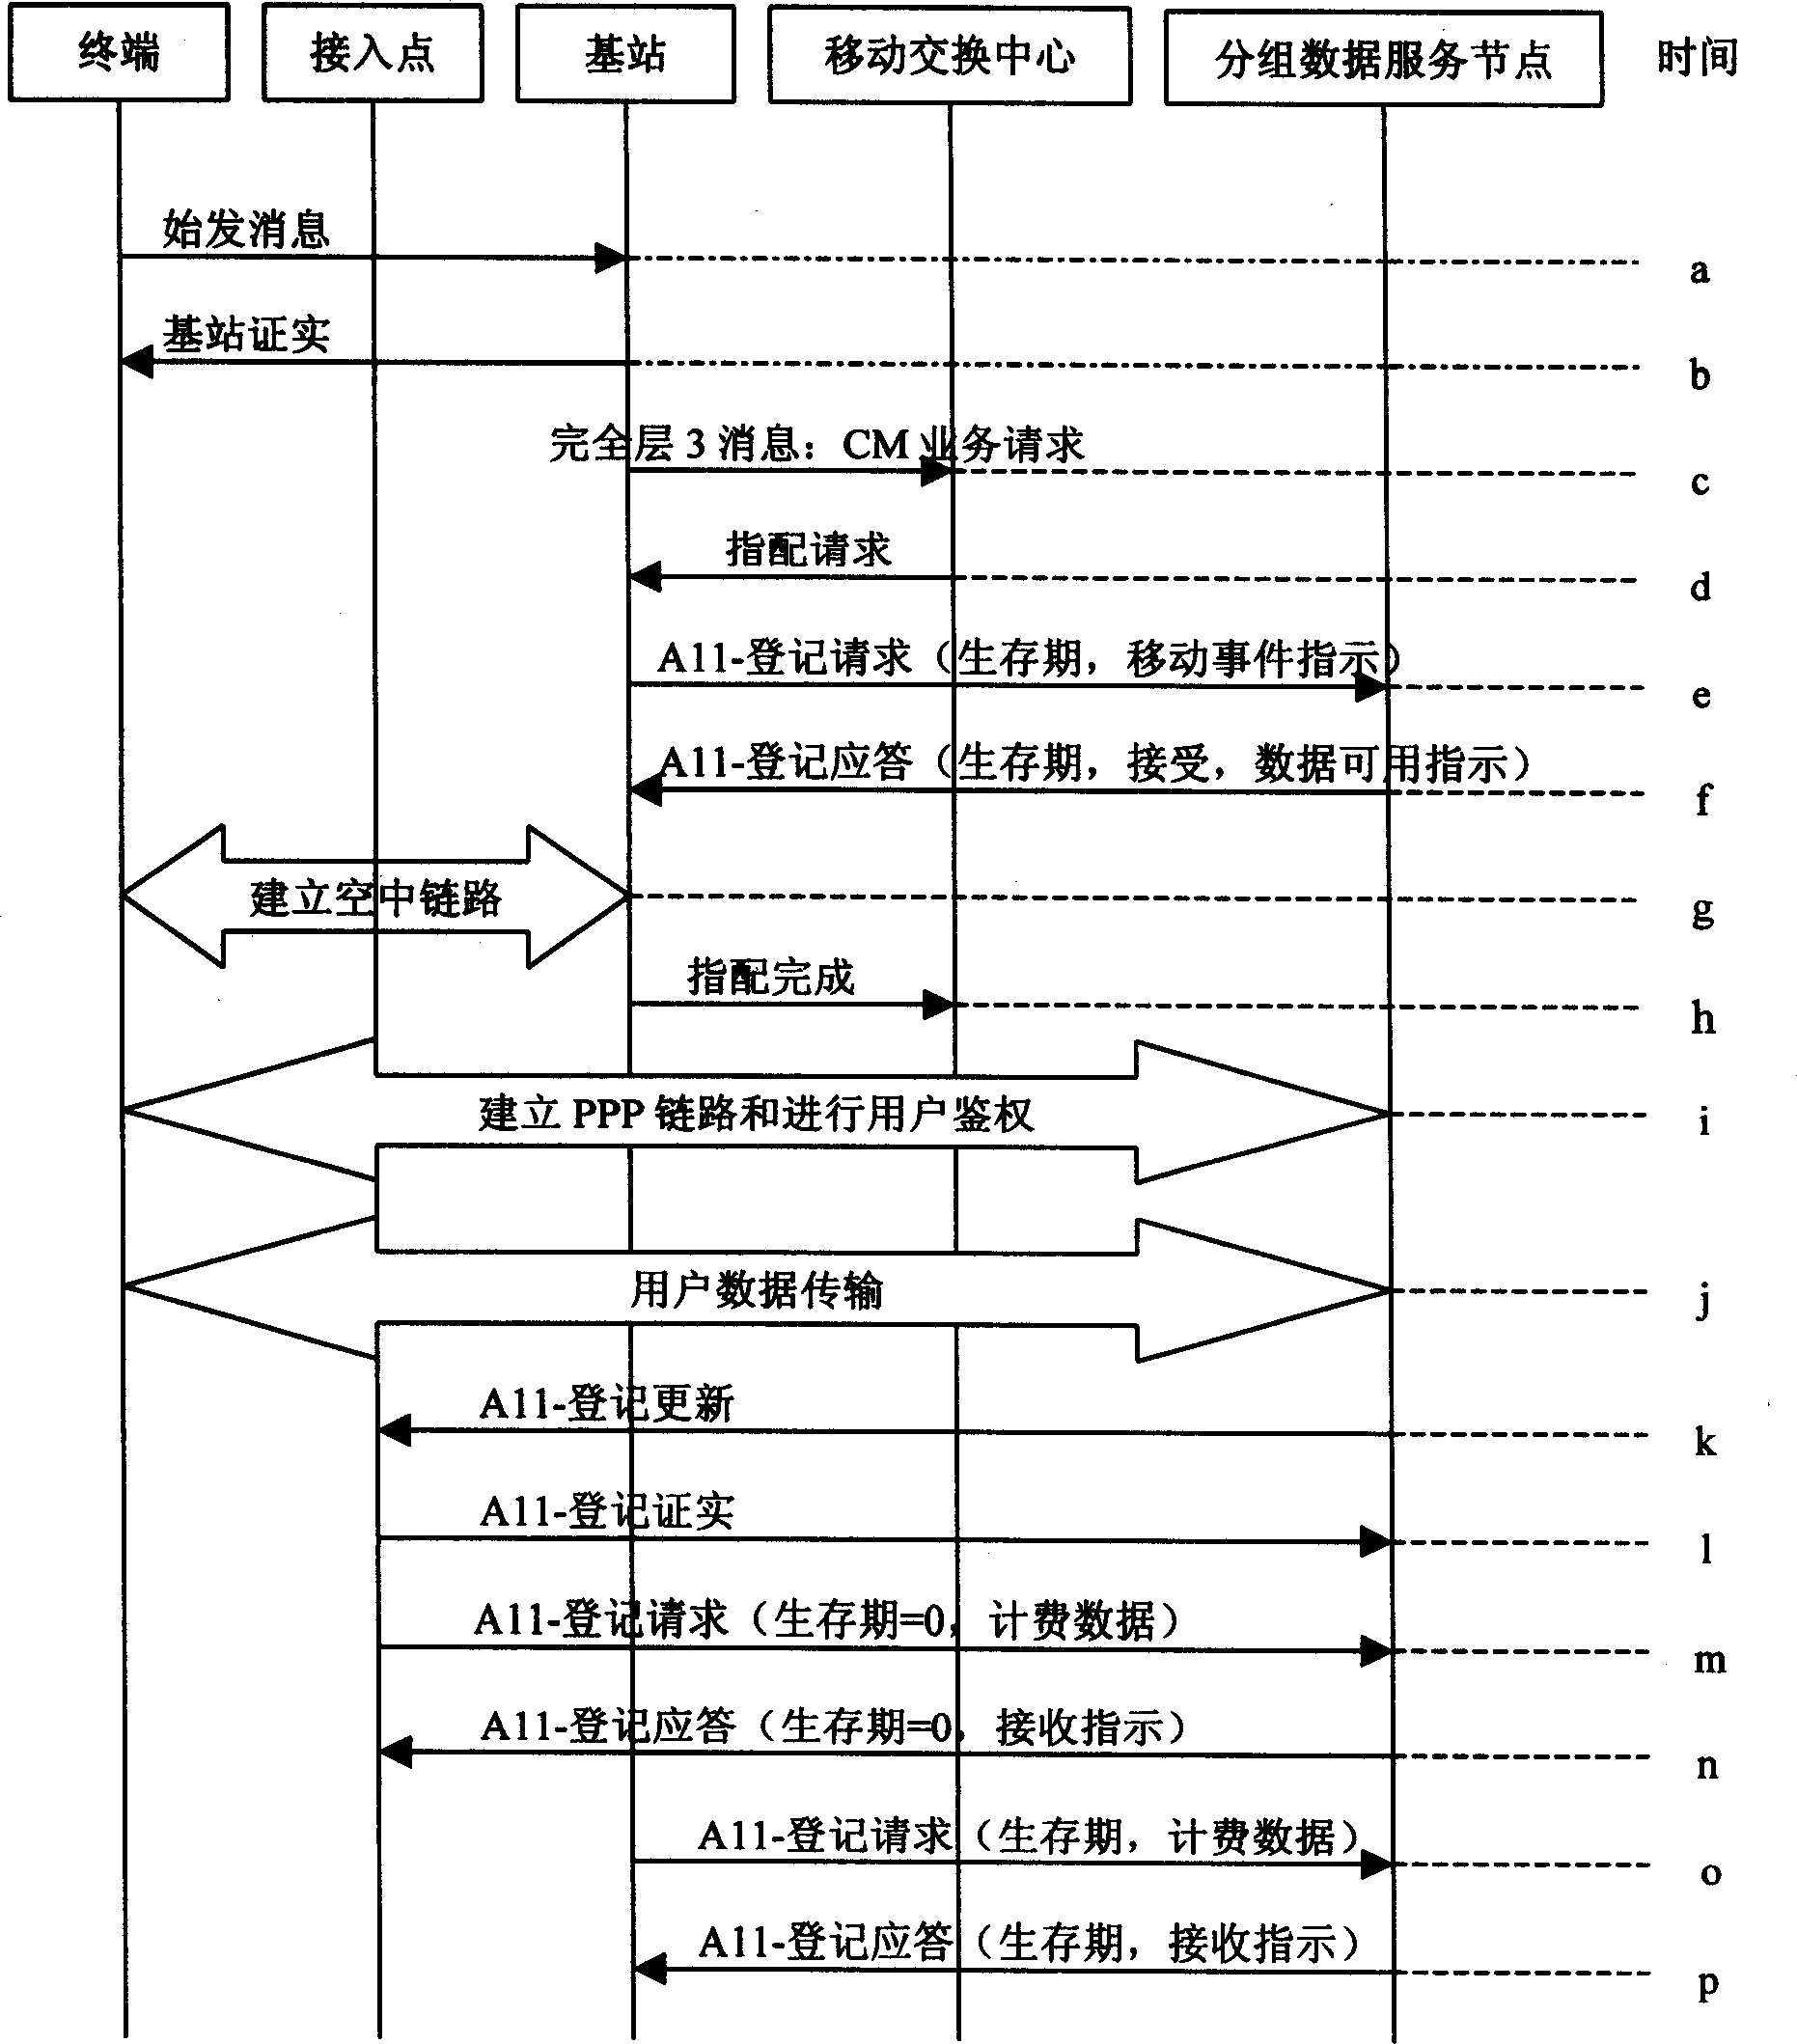 Method for switching between CDMA2000 system and wireless local area network system